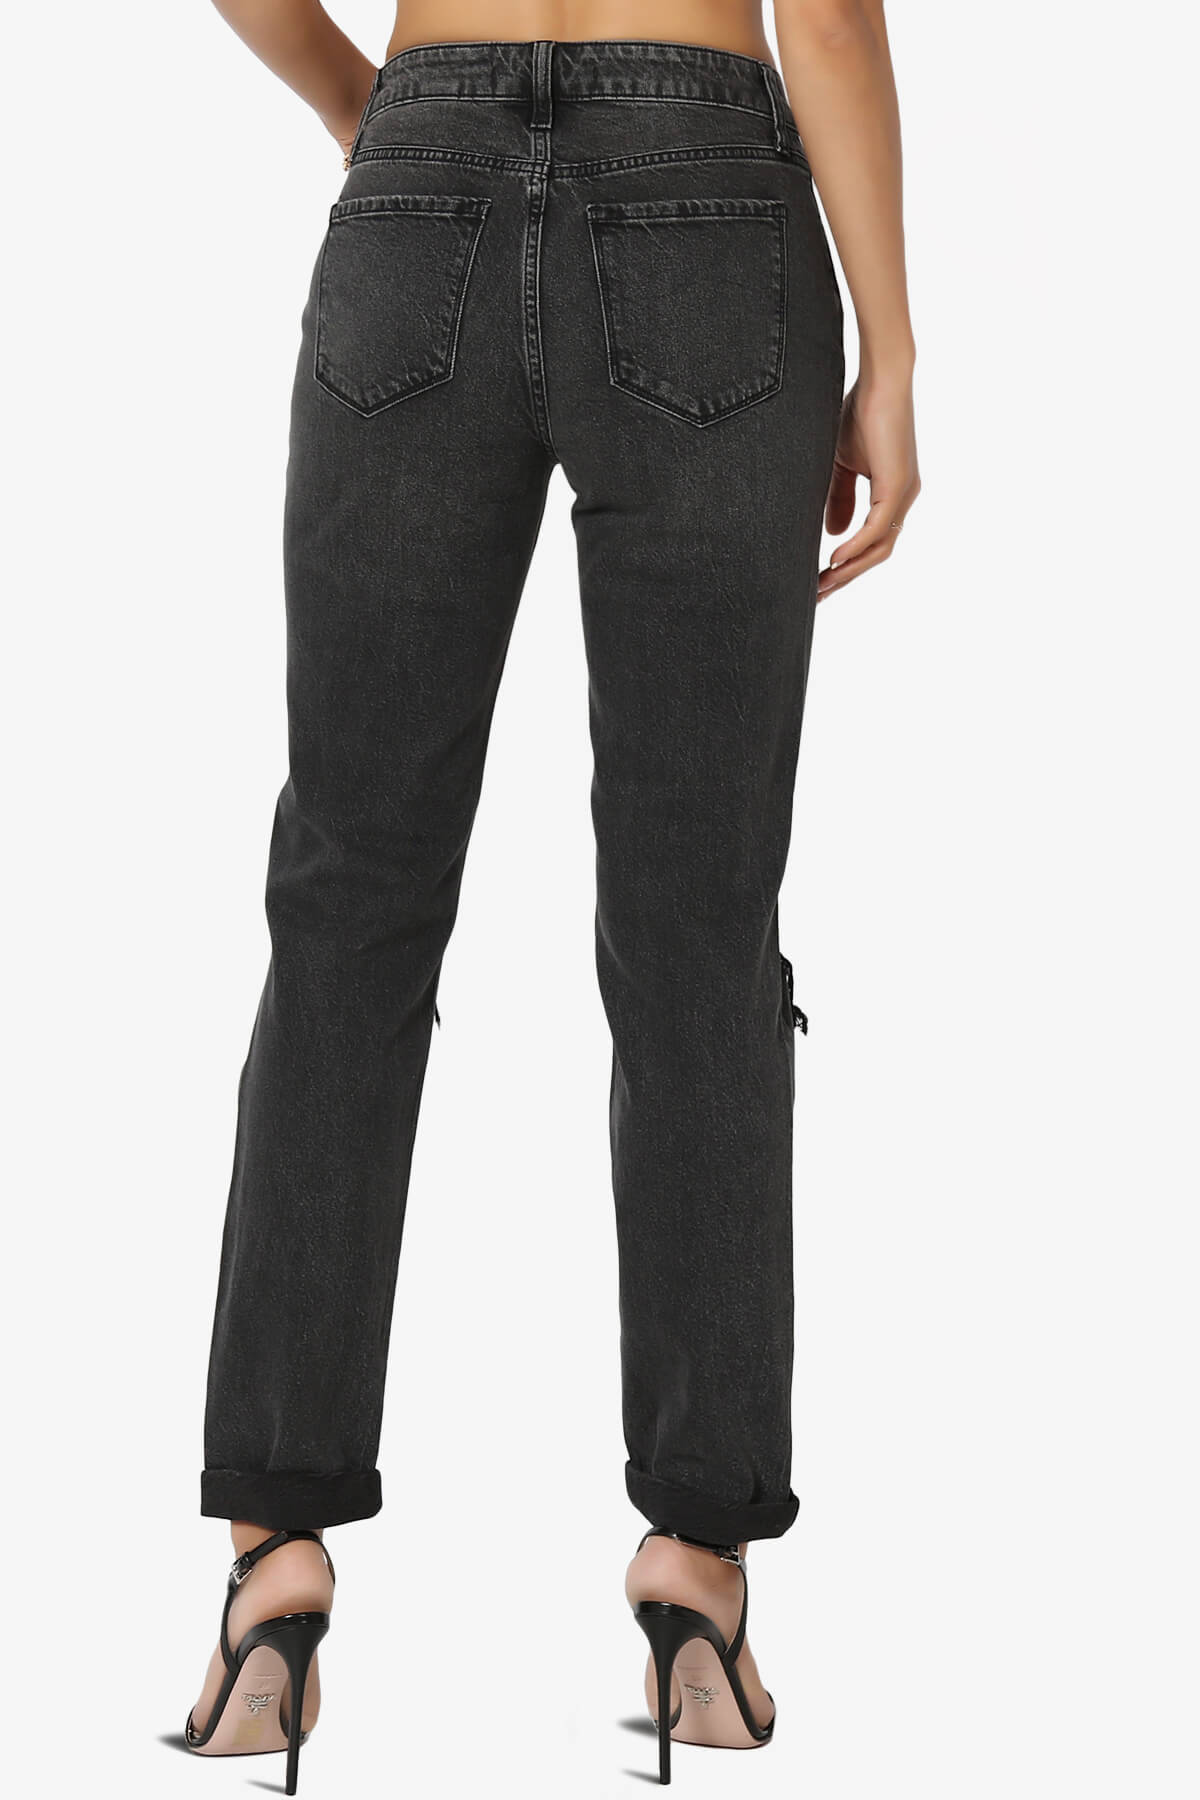 Load image into Gallery viewer, Frankie Distressed Mid Rise Girlfriend Jeans BLACK_2
